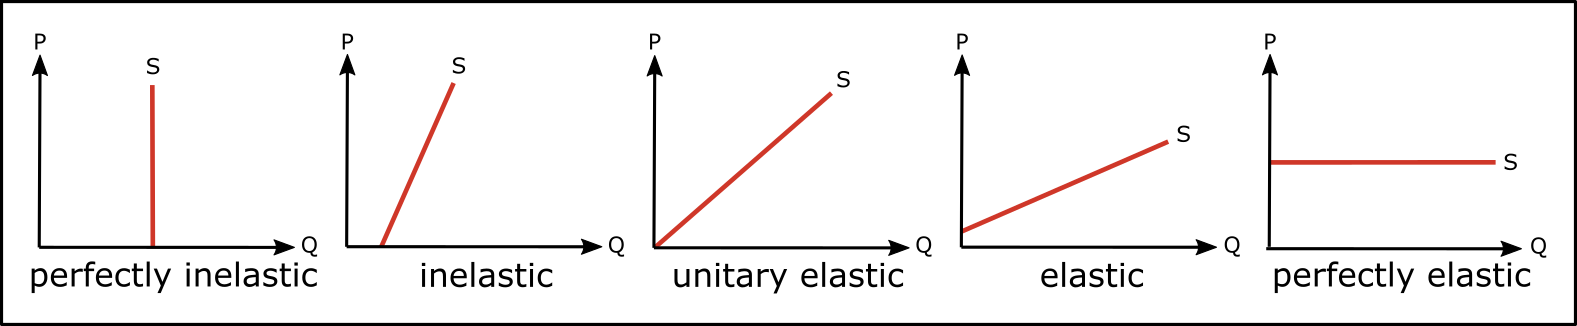 price elasticity of supply curves